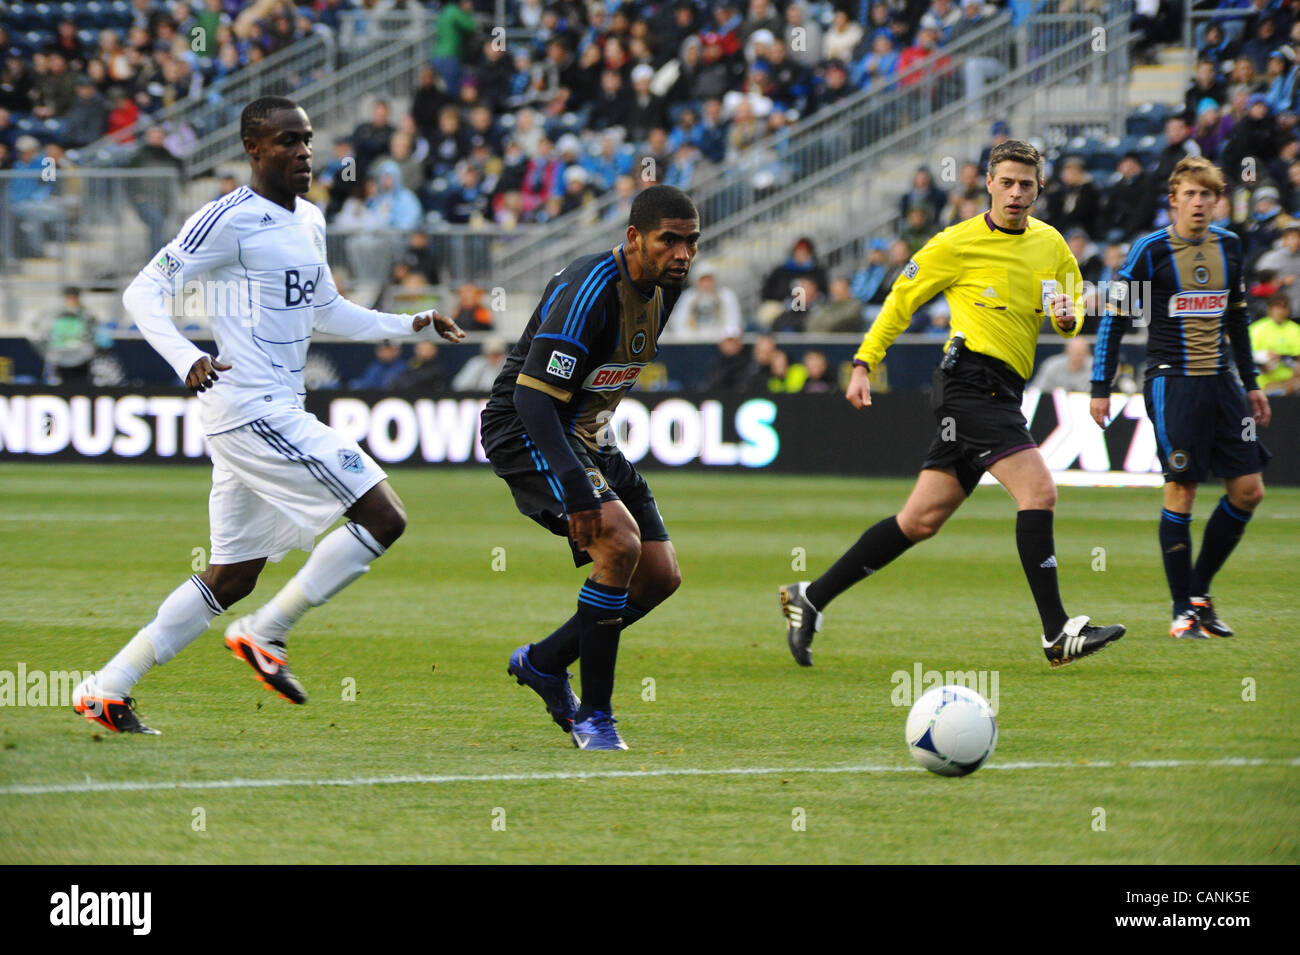 March 31, 2012 - Chester, Pennsylvania, U.S - The Union's GABRIEL GOMEZ in a action during the match at PPL Park. (Credit Image: © Ricky Fitchett/ZUMAPRESS.com) Stock Photo